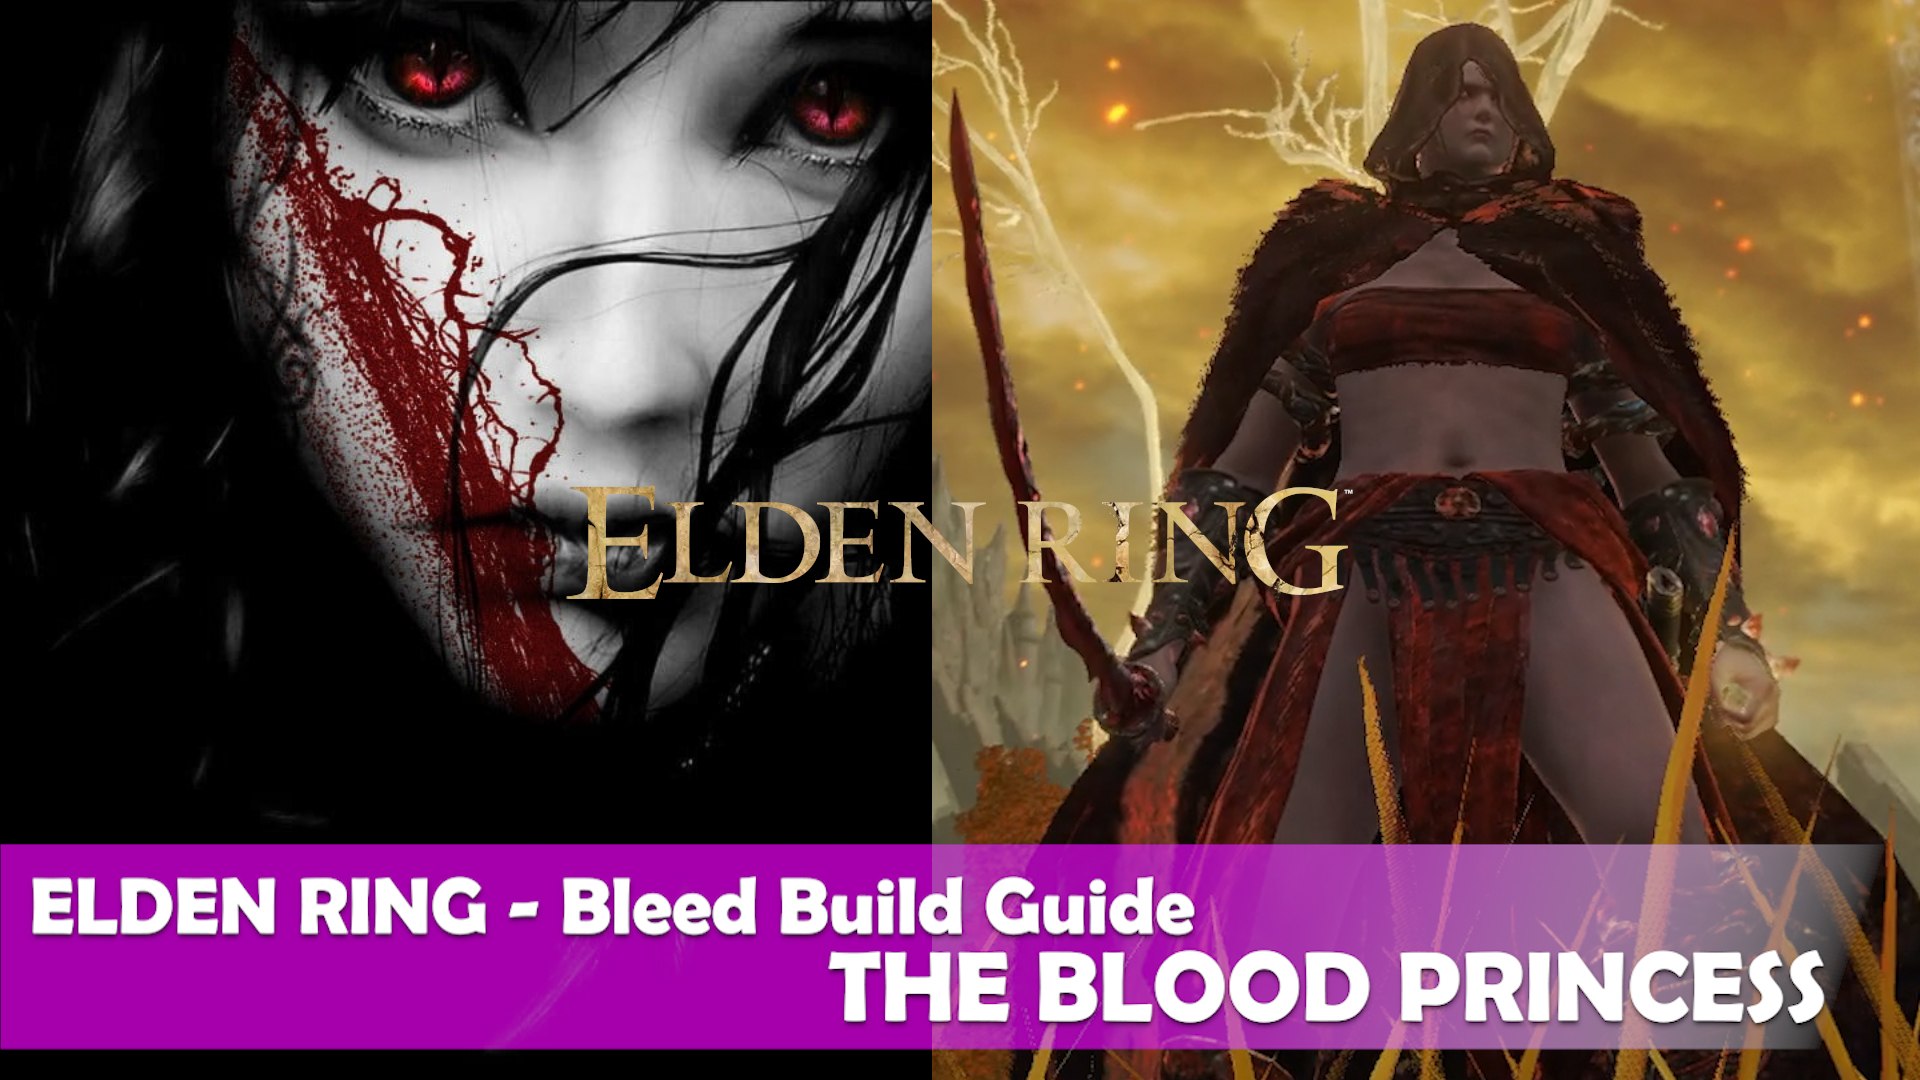 Elden Ring - Bleed Build Guide - THE BLOOD PRINCESS - video Dailymotion